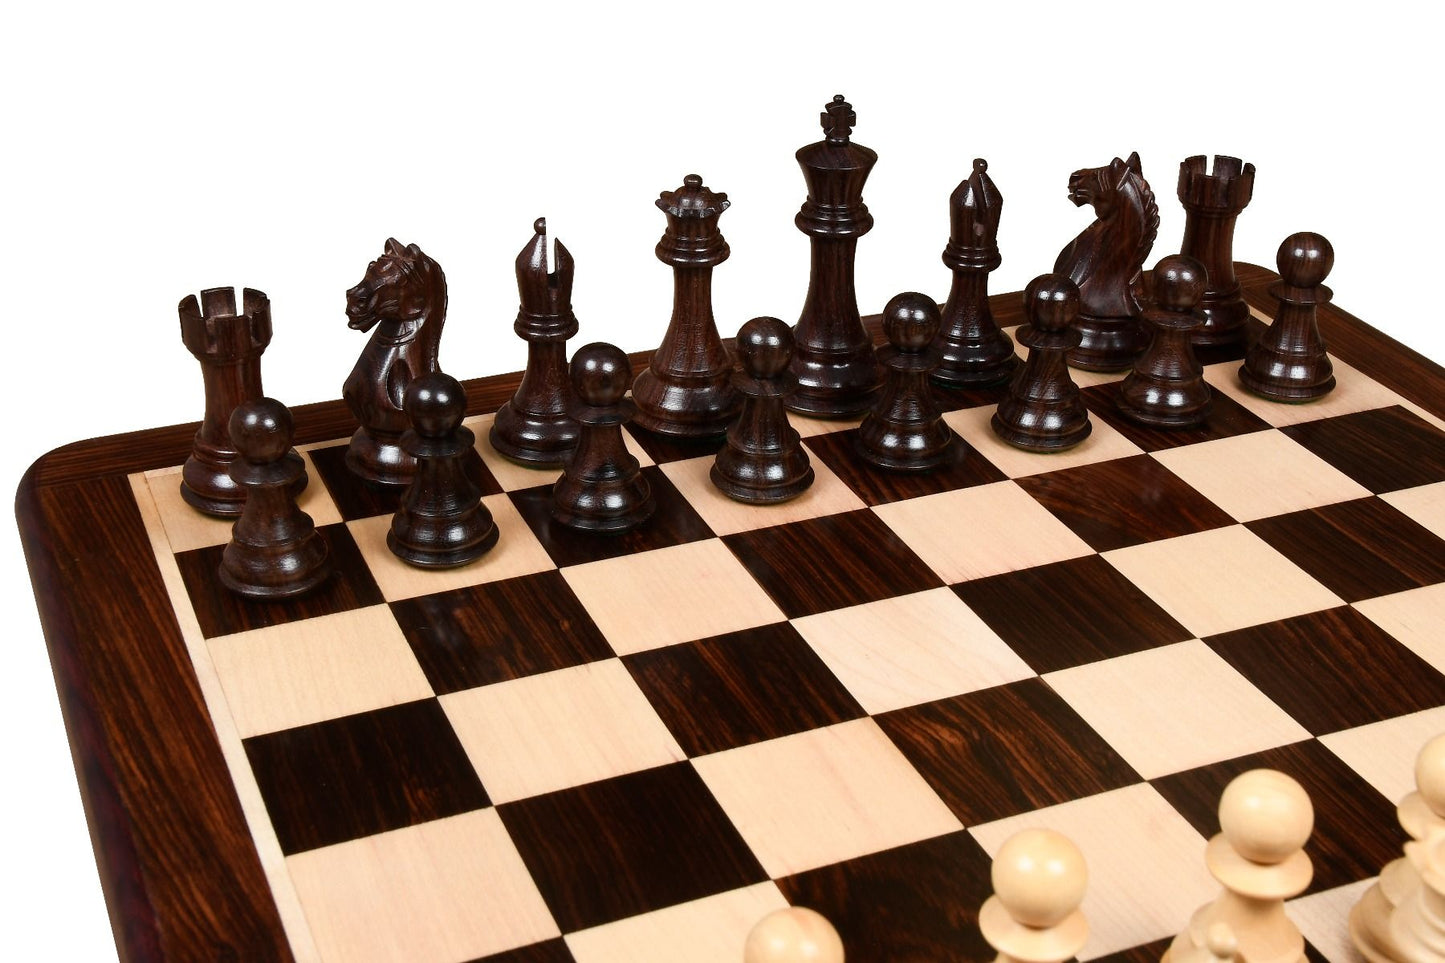 COMBO OF FIERCE KNIGHT STAUNTON SERIES CHESS PIECES IN ROSEWOOD & BOX WOOD - 4.1" KING WITH WOODEN CHESS BOARD -  21"